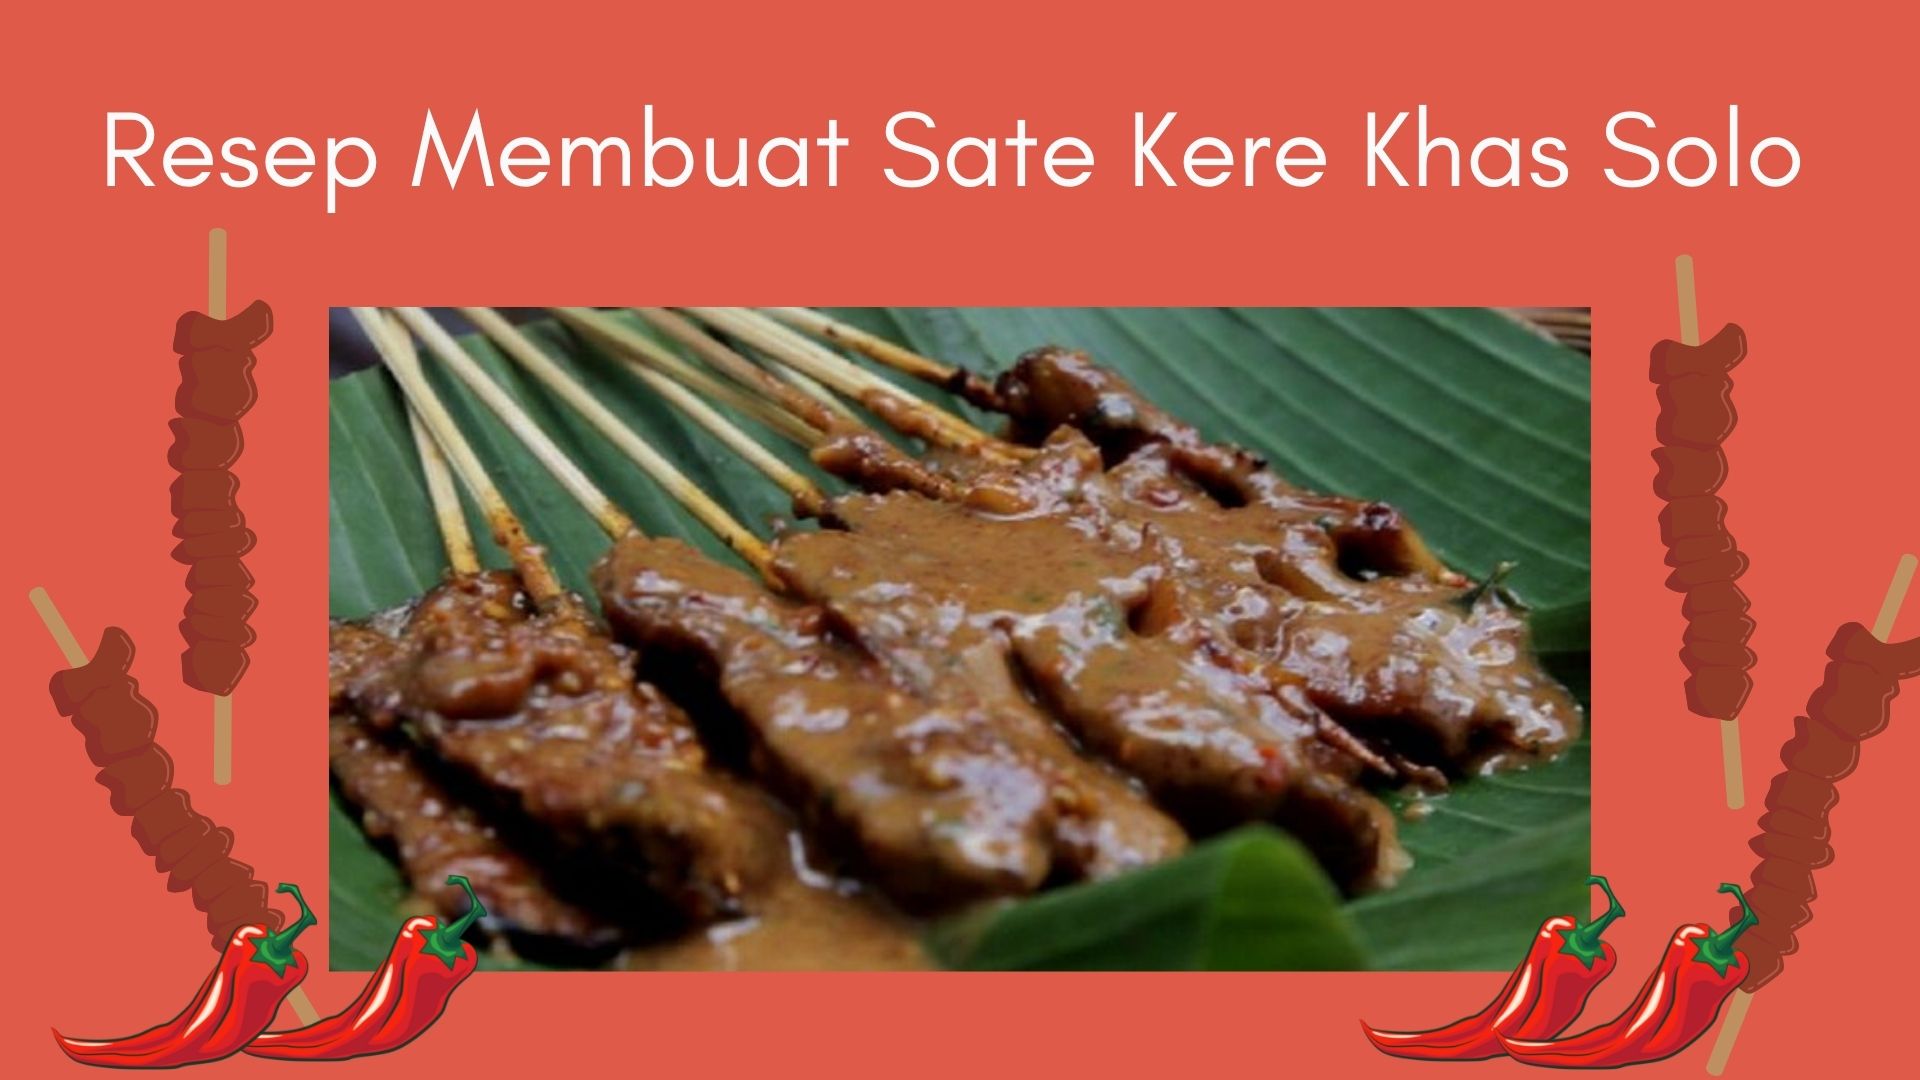 You are currently viewing Resep Membuat Sate Kere Khas Solo